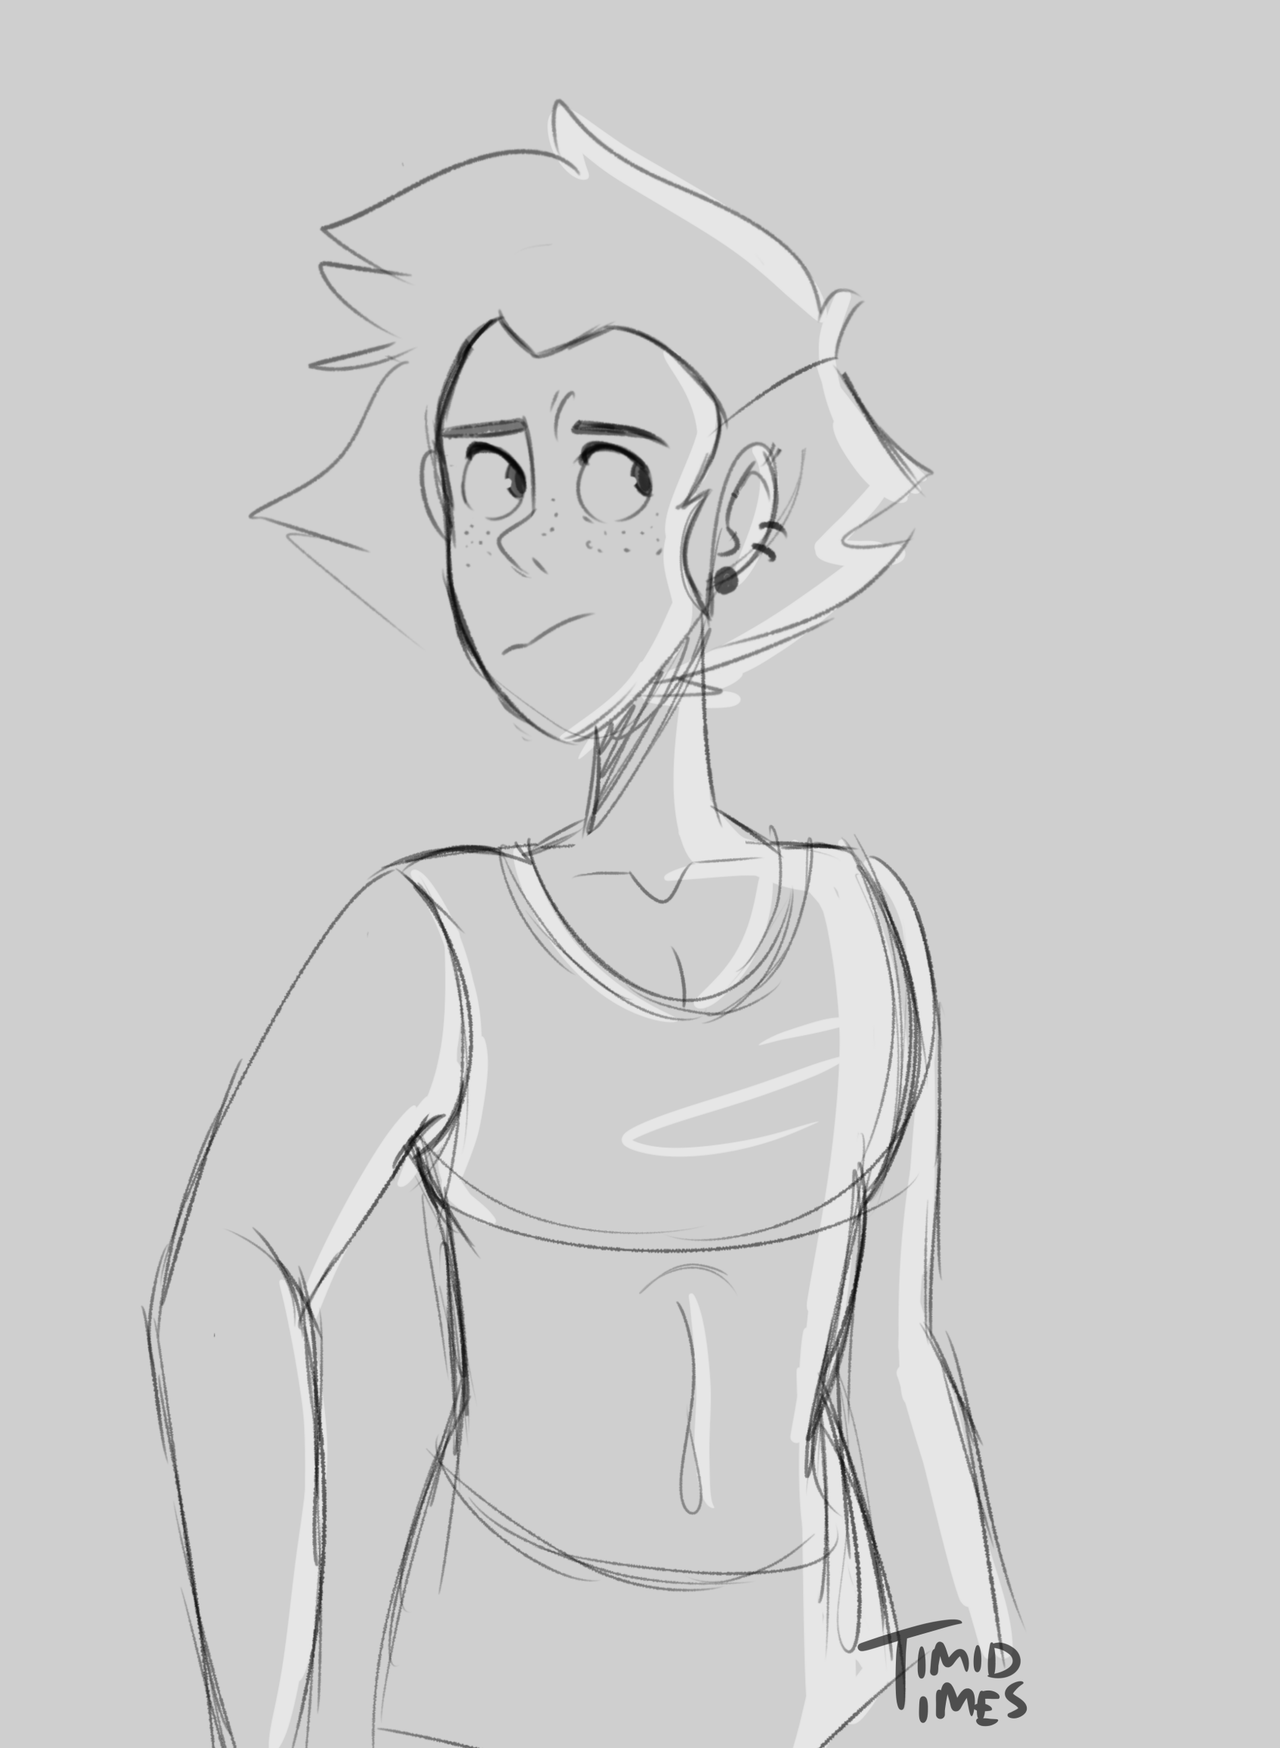 I spend 99.9% percent of my time drawing Peridot when I really should be drawing other things/characters. Oops ¯\_(ツ)_/¯